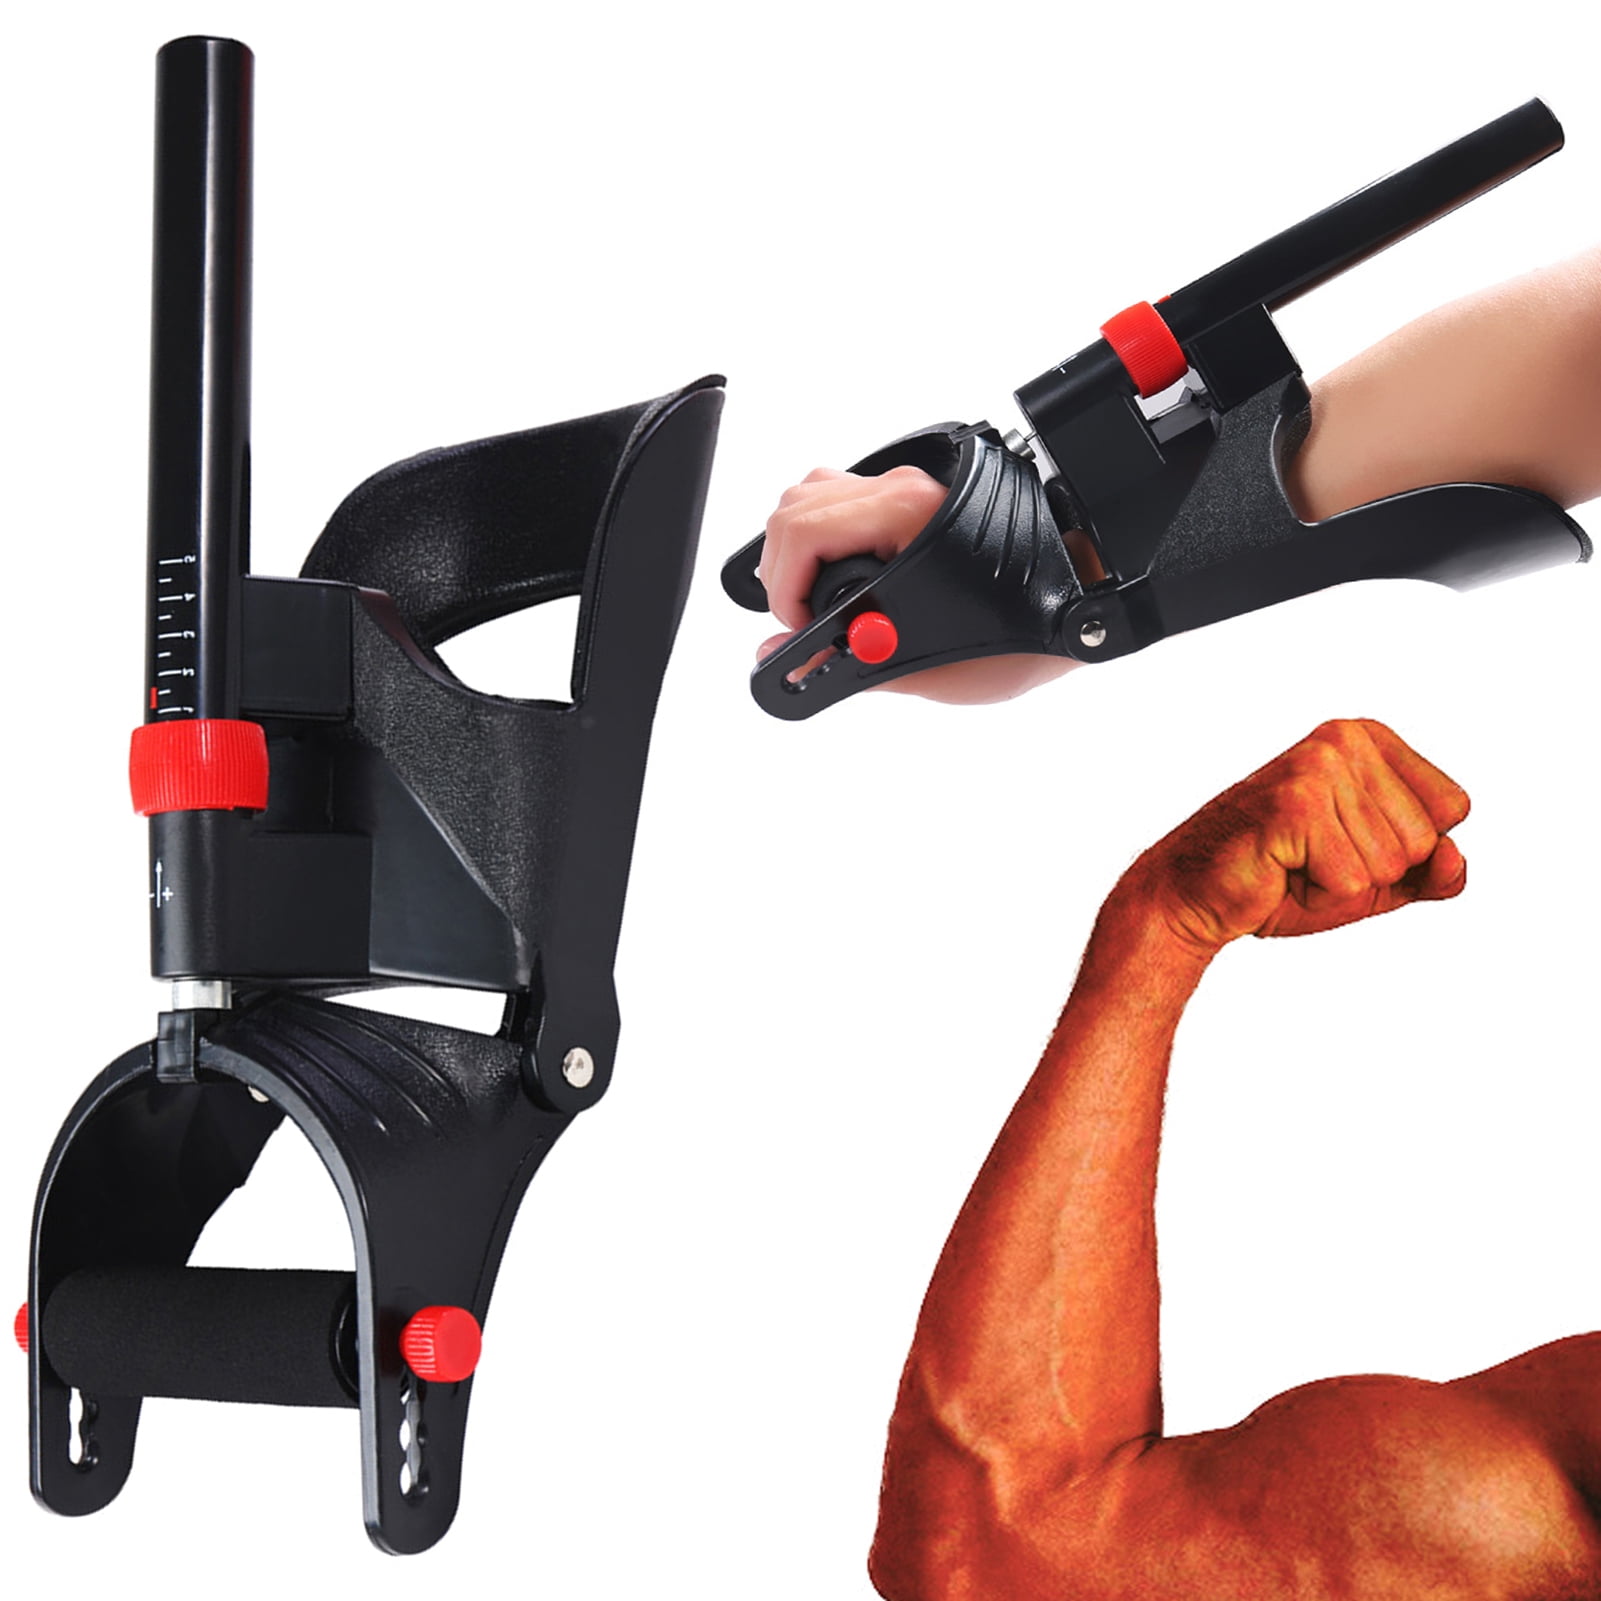 LOOKEE Arm Workout EMS Exerciser, Electric Muscle Trainer Machine for Arms and Hands.